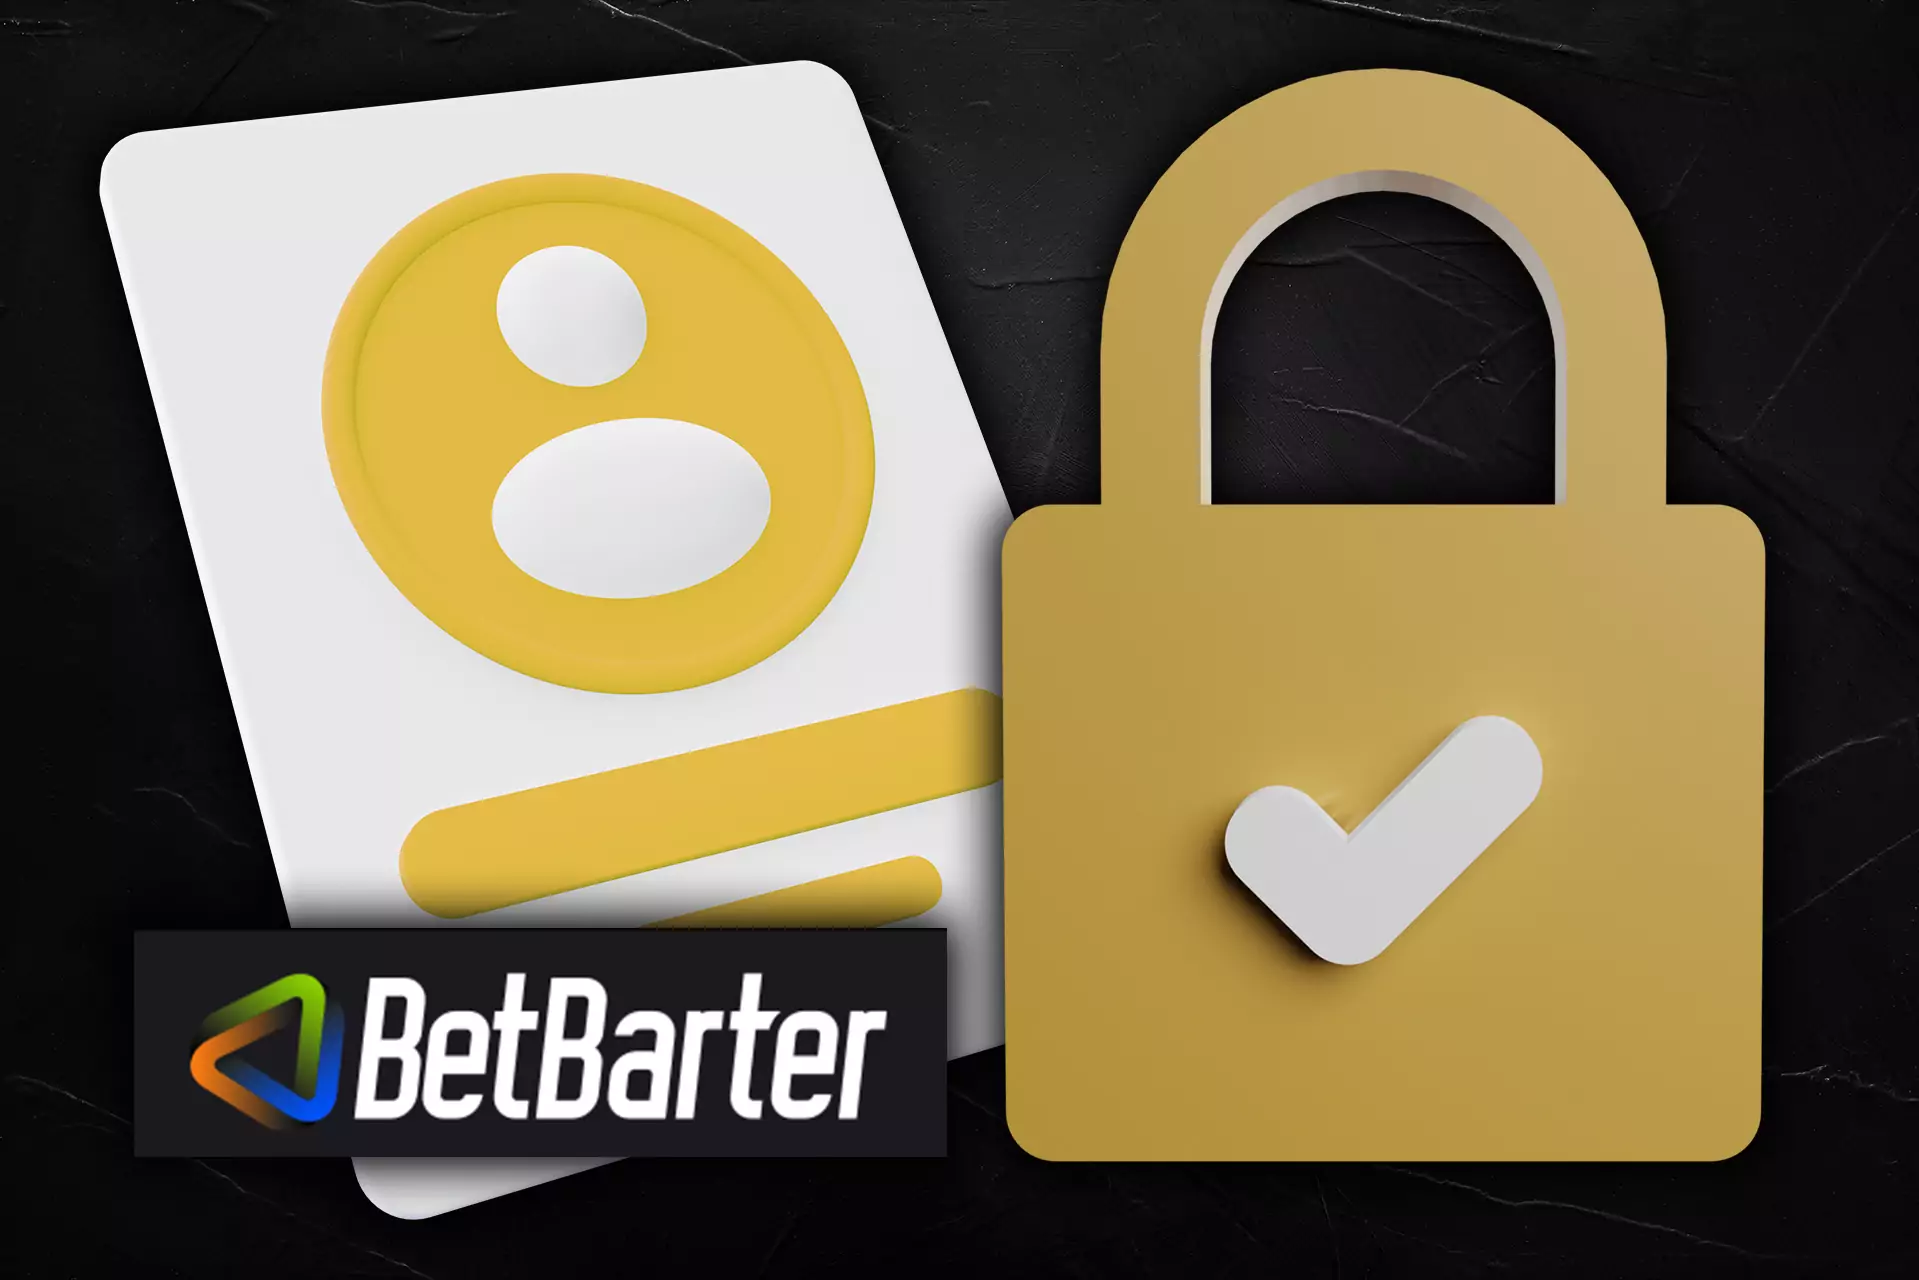 BetBarter protects users' personal information.